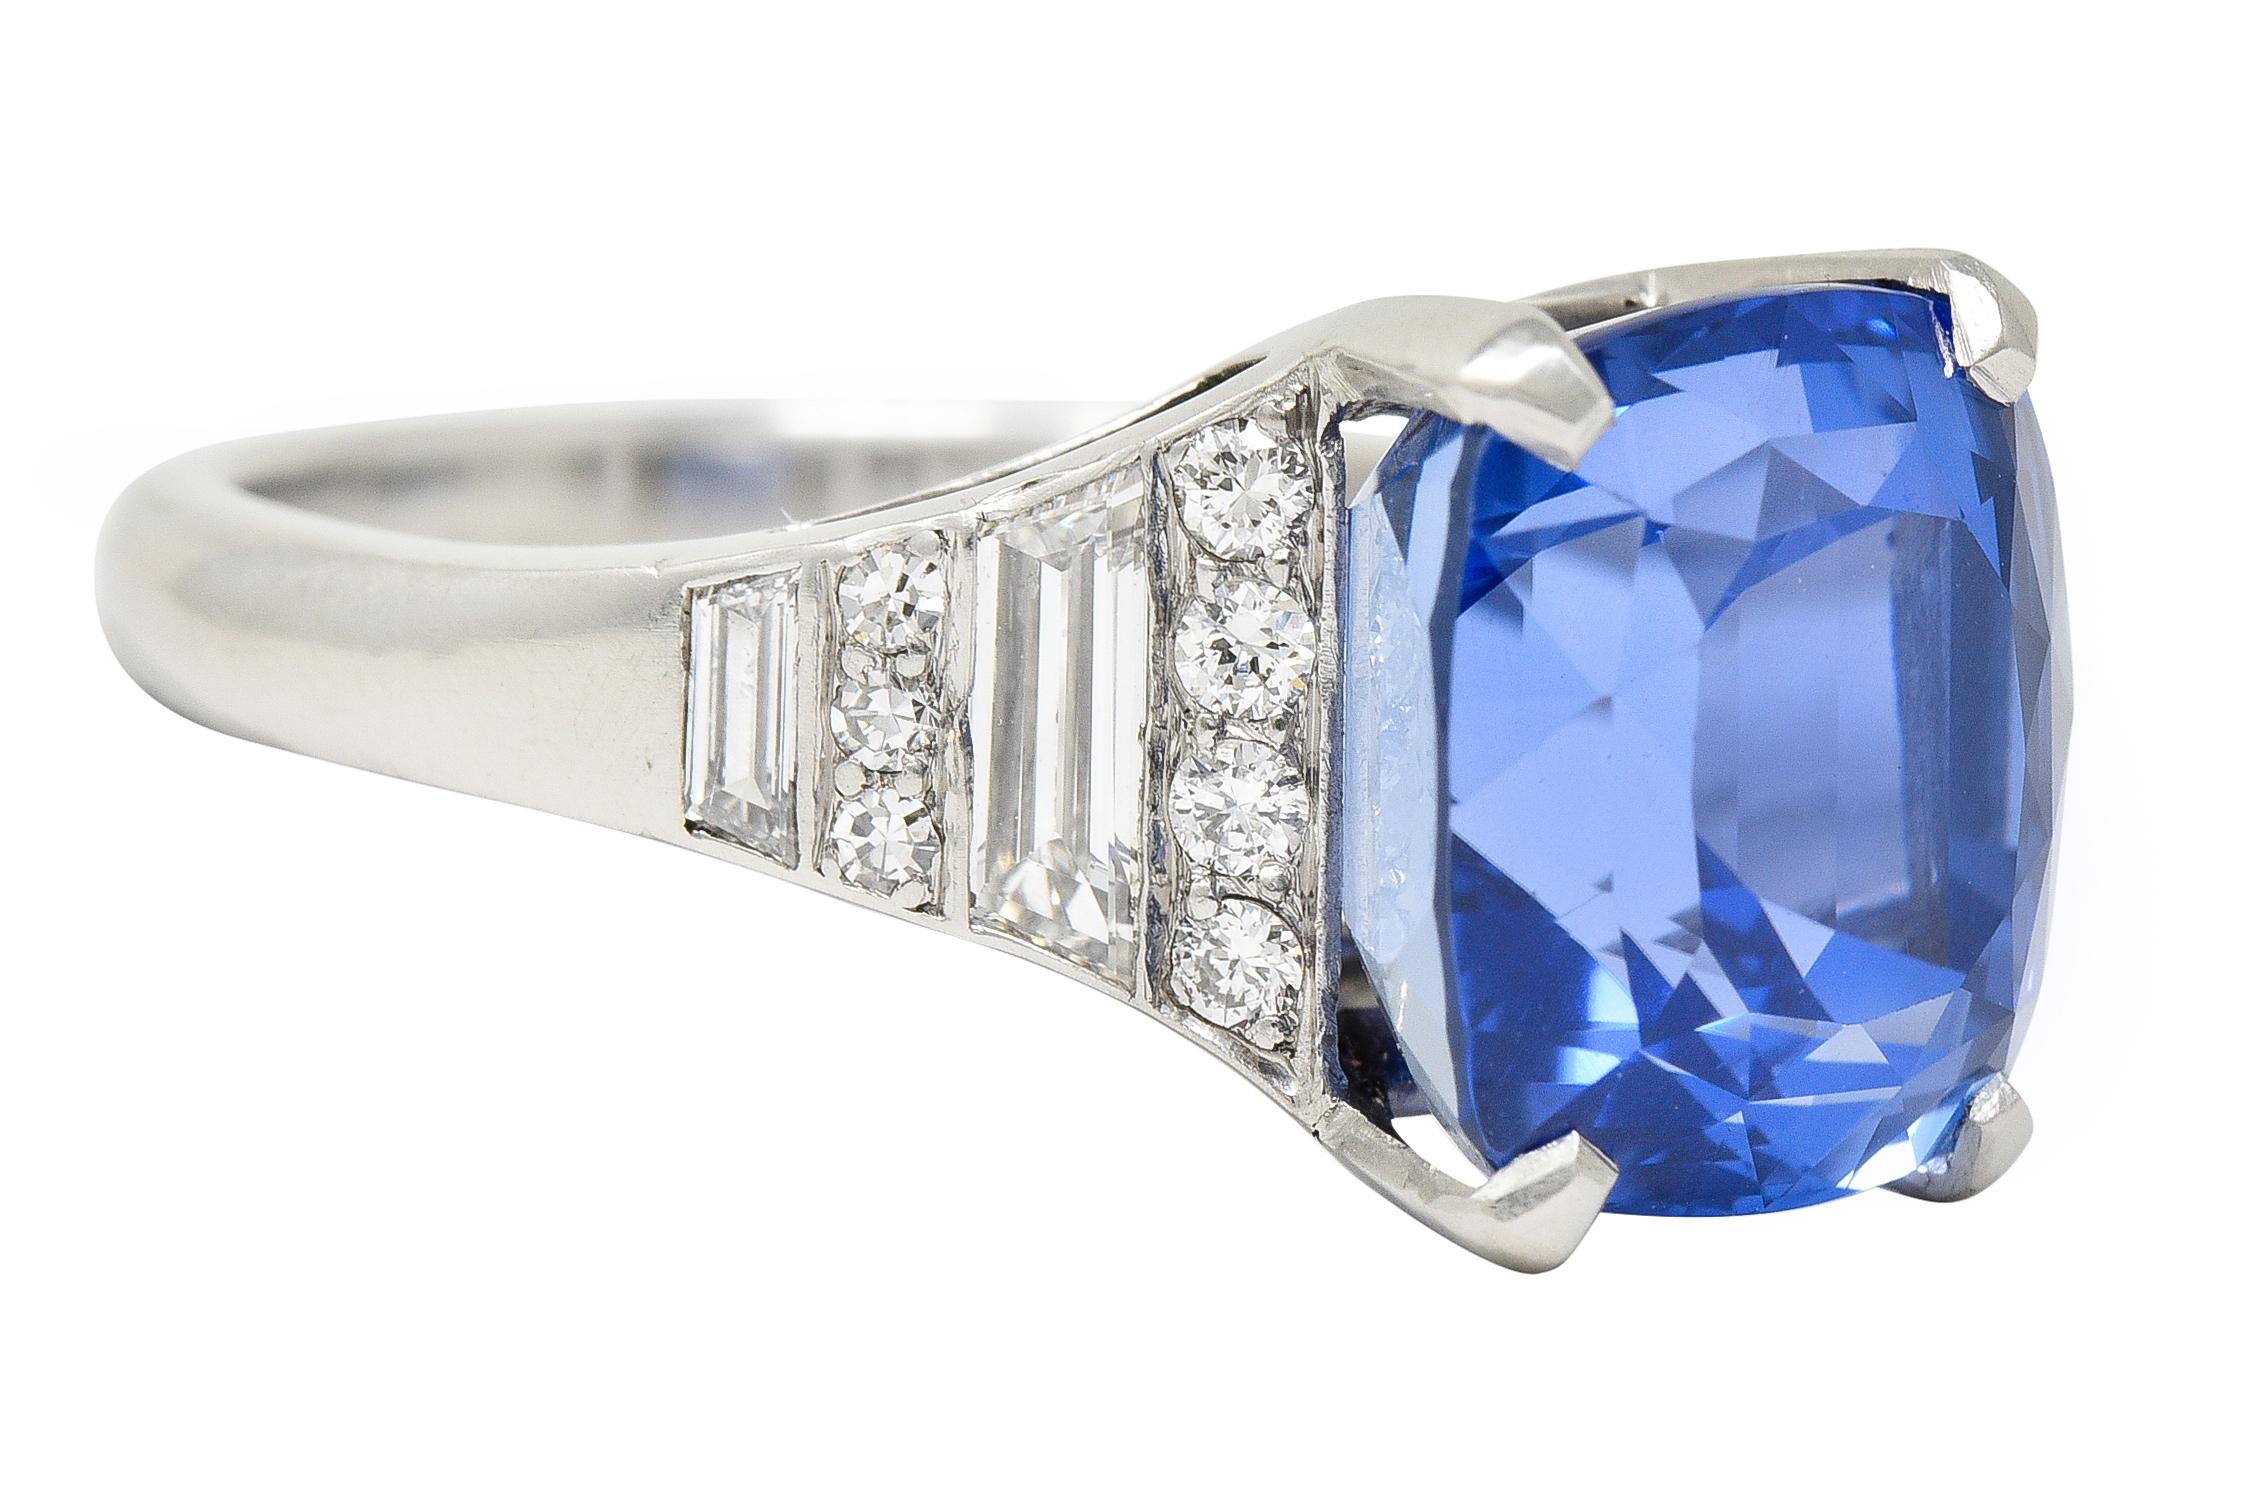 Centering a mixed cushion cut sapphire weighing 10.02 carats - transparent medium blue in color. Natural Ceylon in origin with no indications of heat treatment - prong set in basket. Flanked by cathedral shoulders set with tapered baguette and round